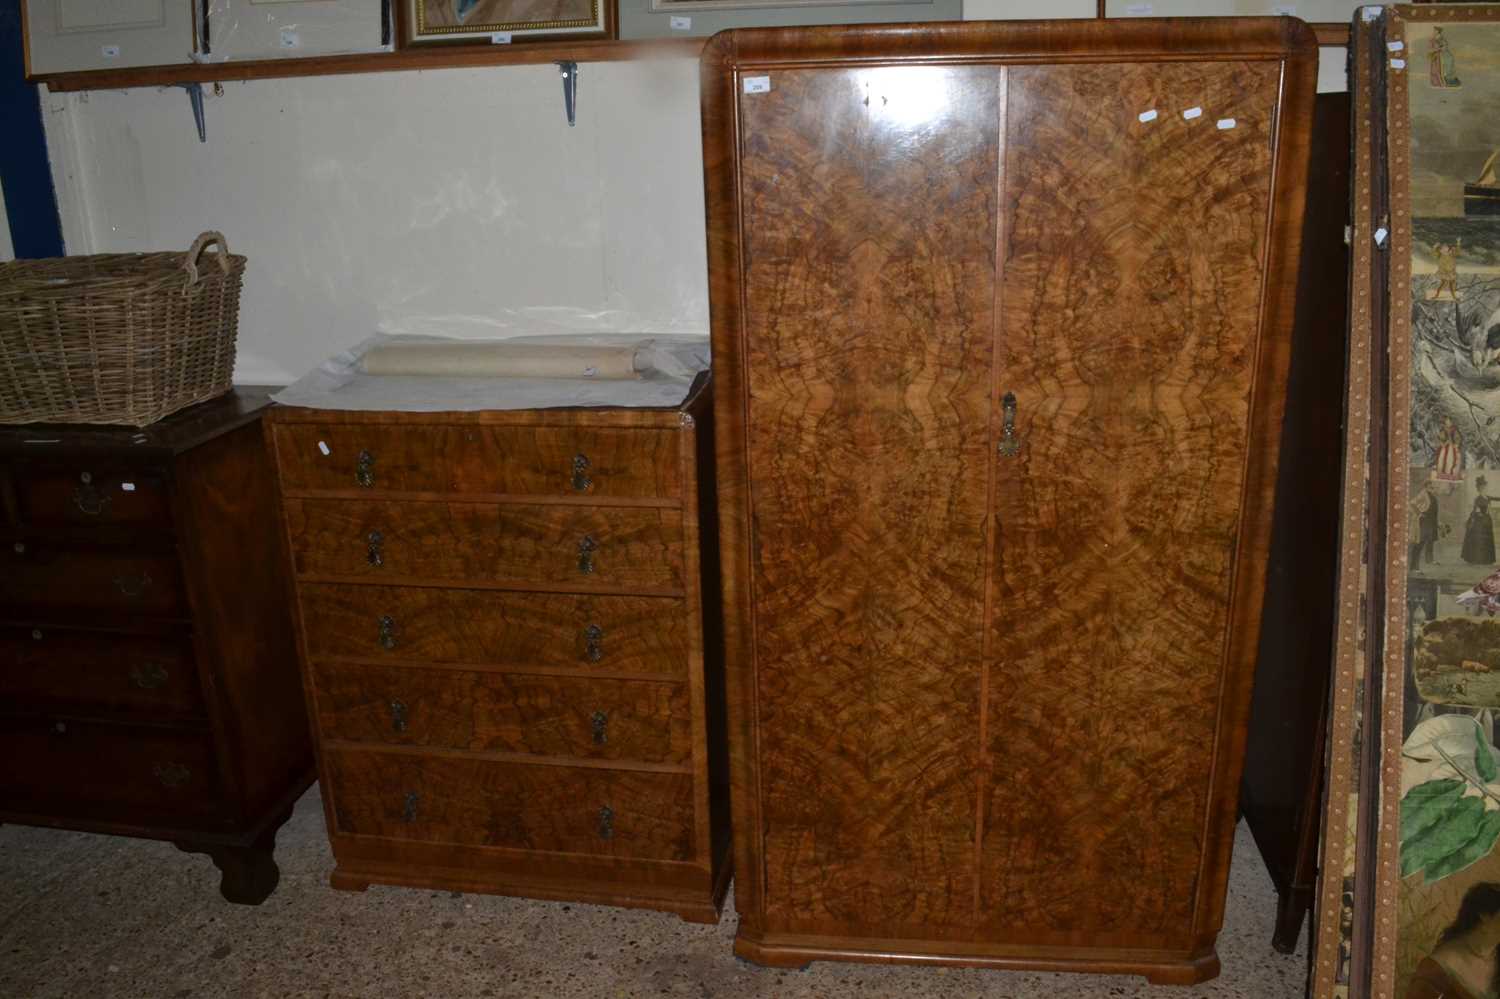 Early 20th Century walnut veneered double door wardrobe and accompanying five drawer chest